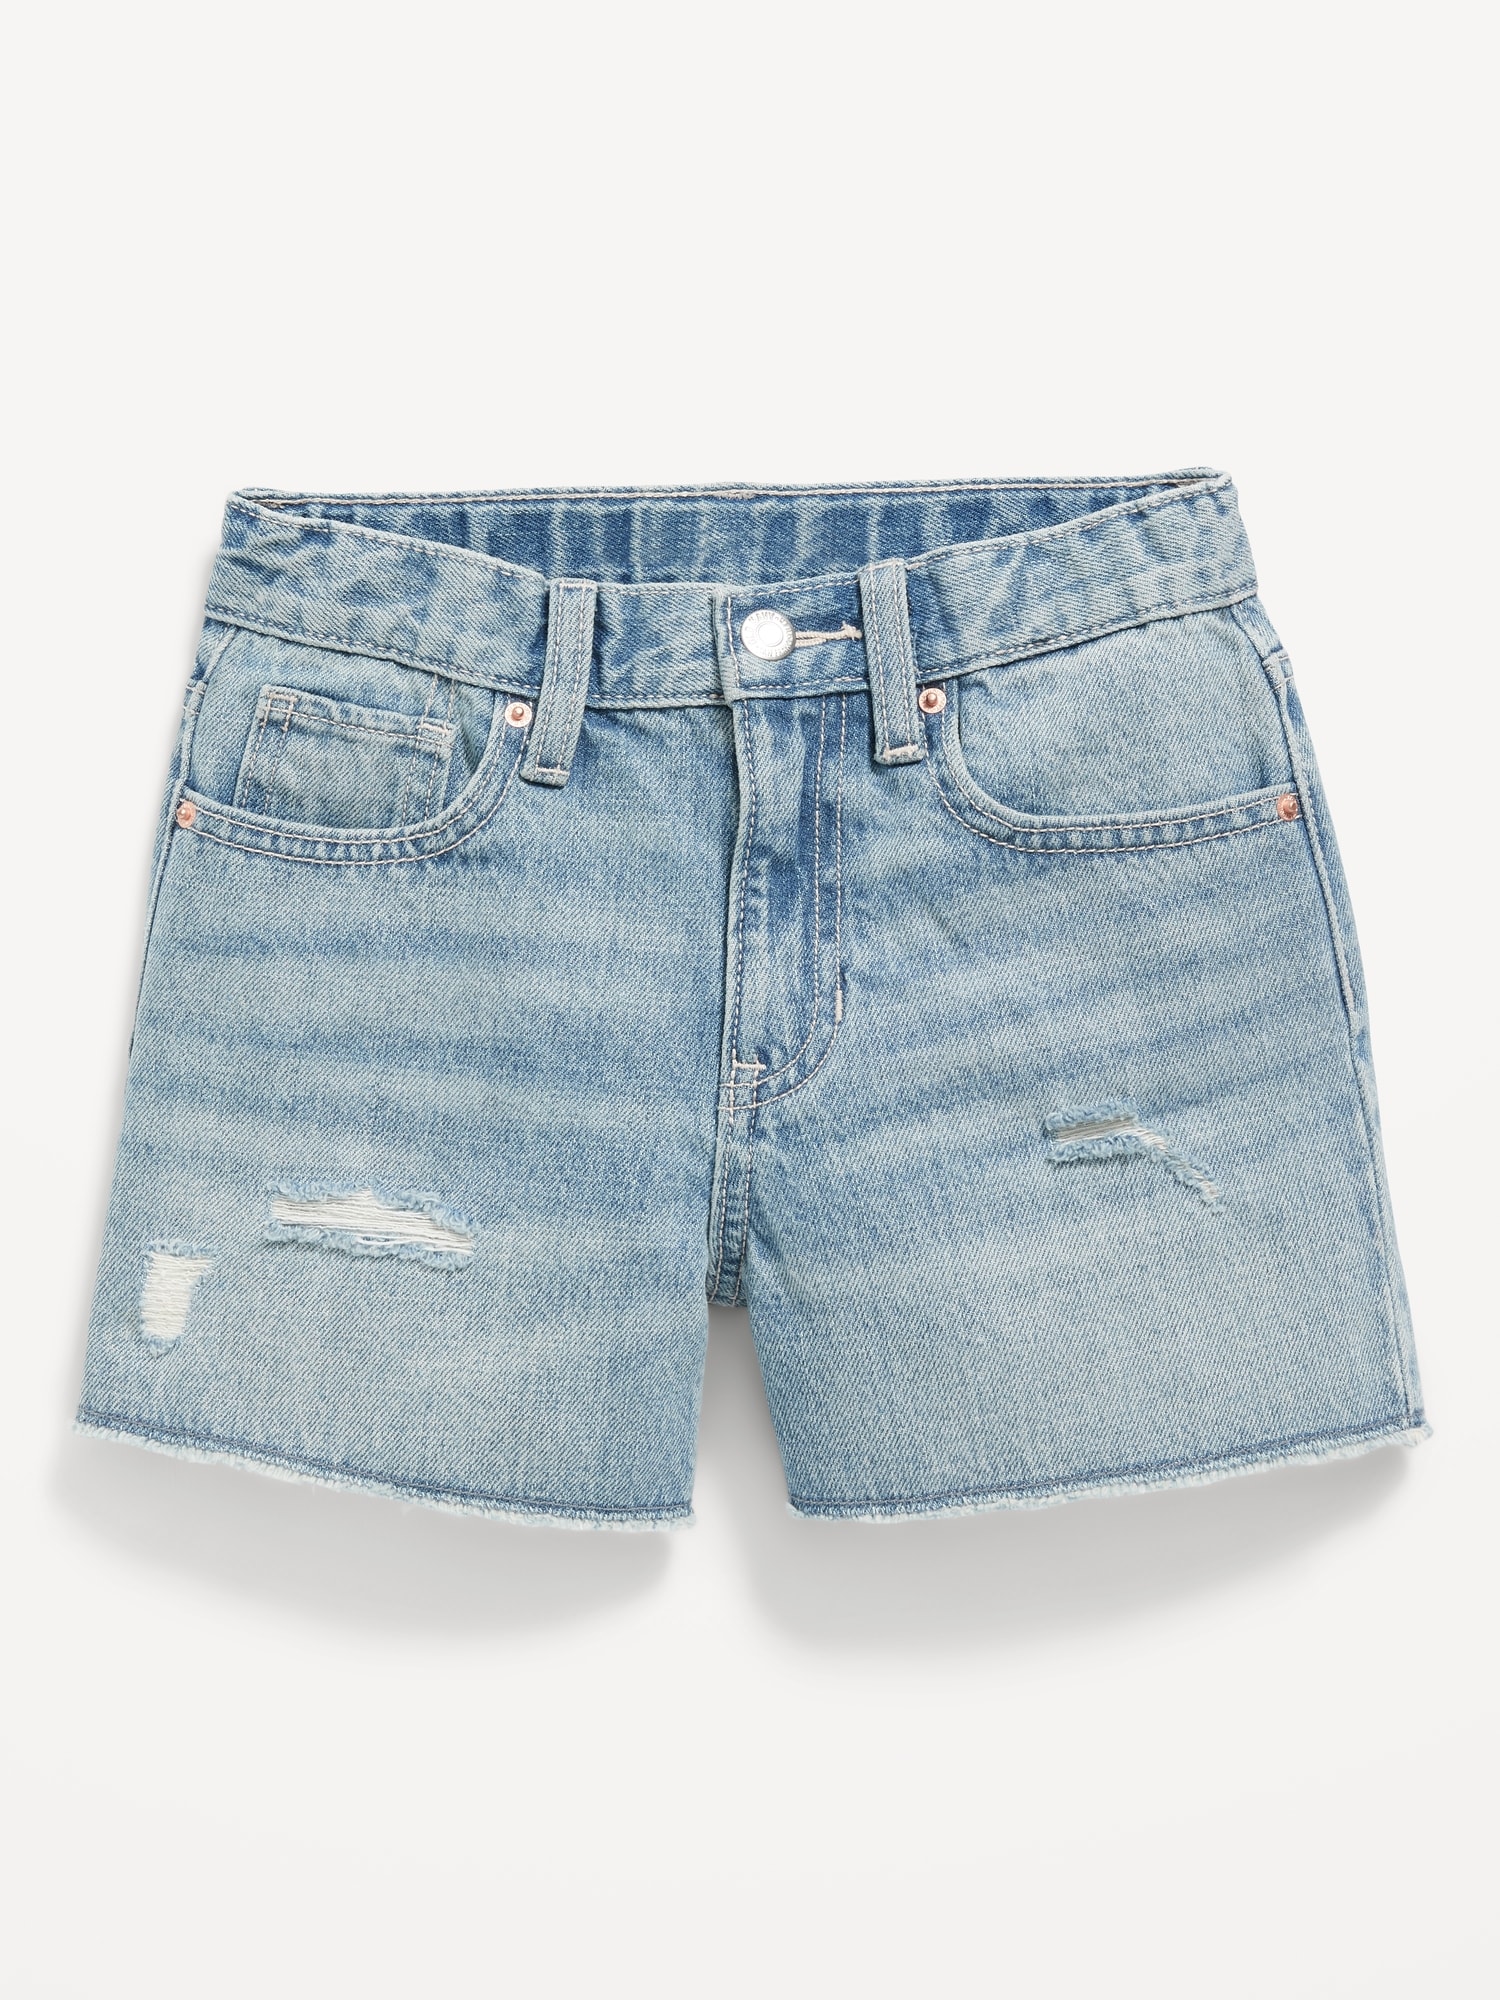 High-Waisted Ripped Non-Stretch Cut-Off Jean Shorts for Girls | Old Navy